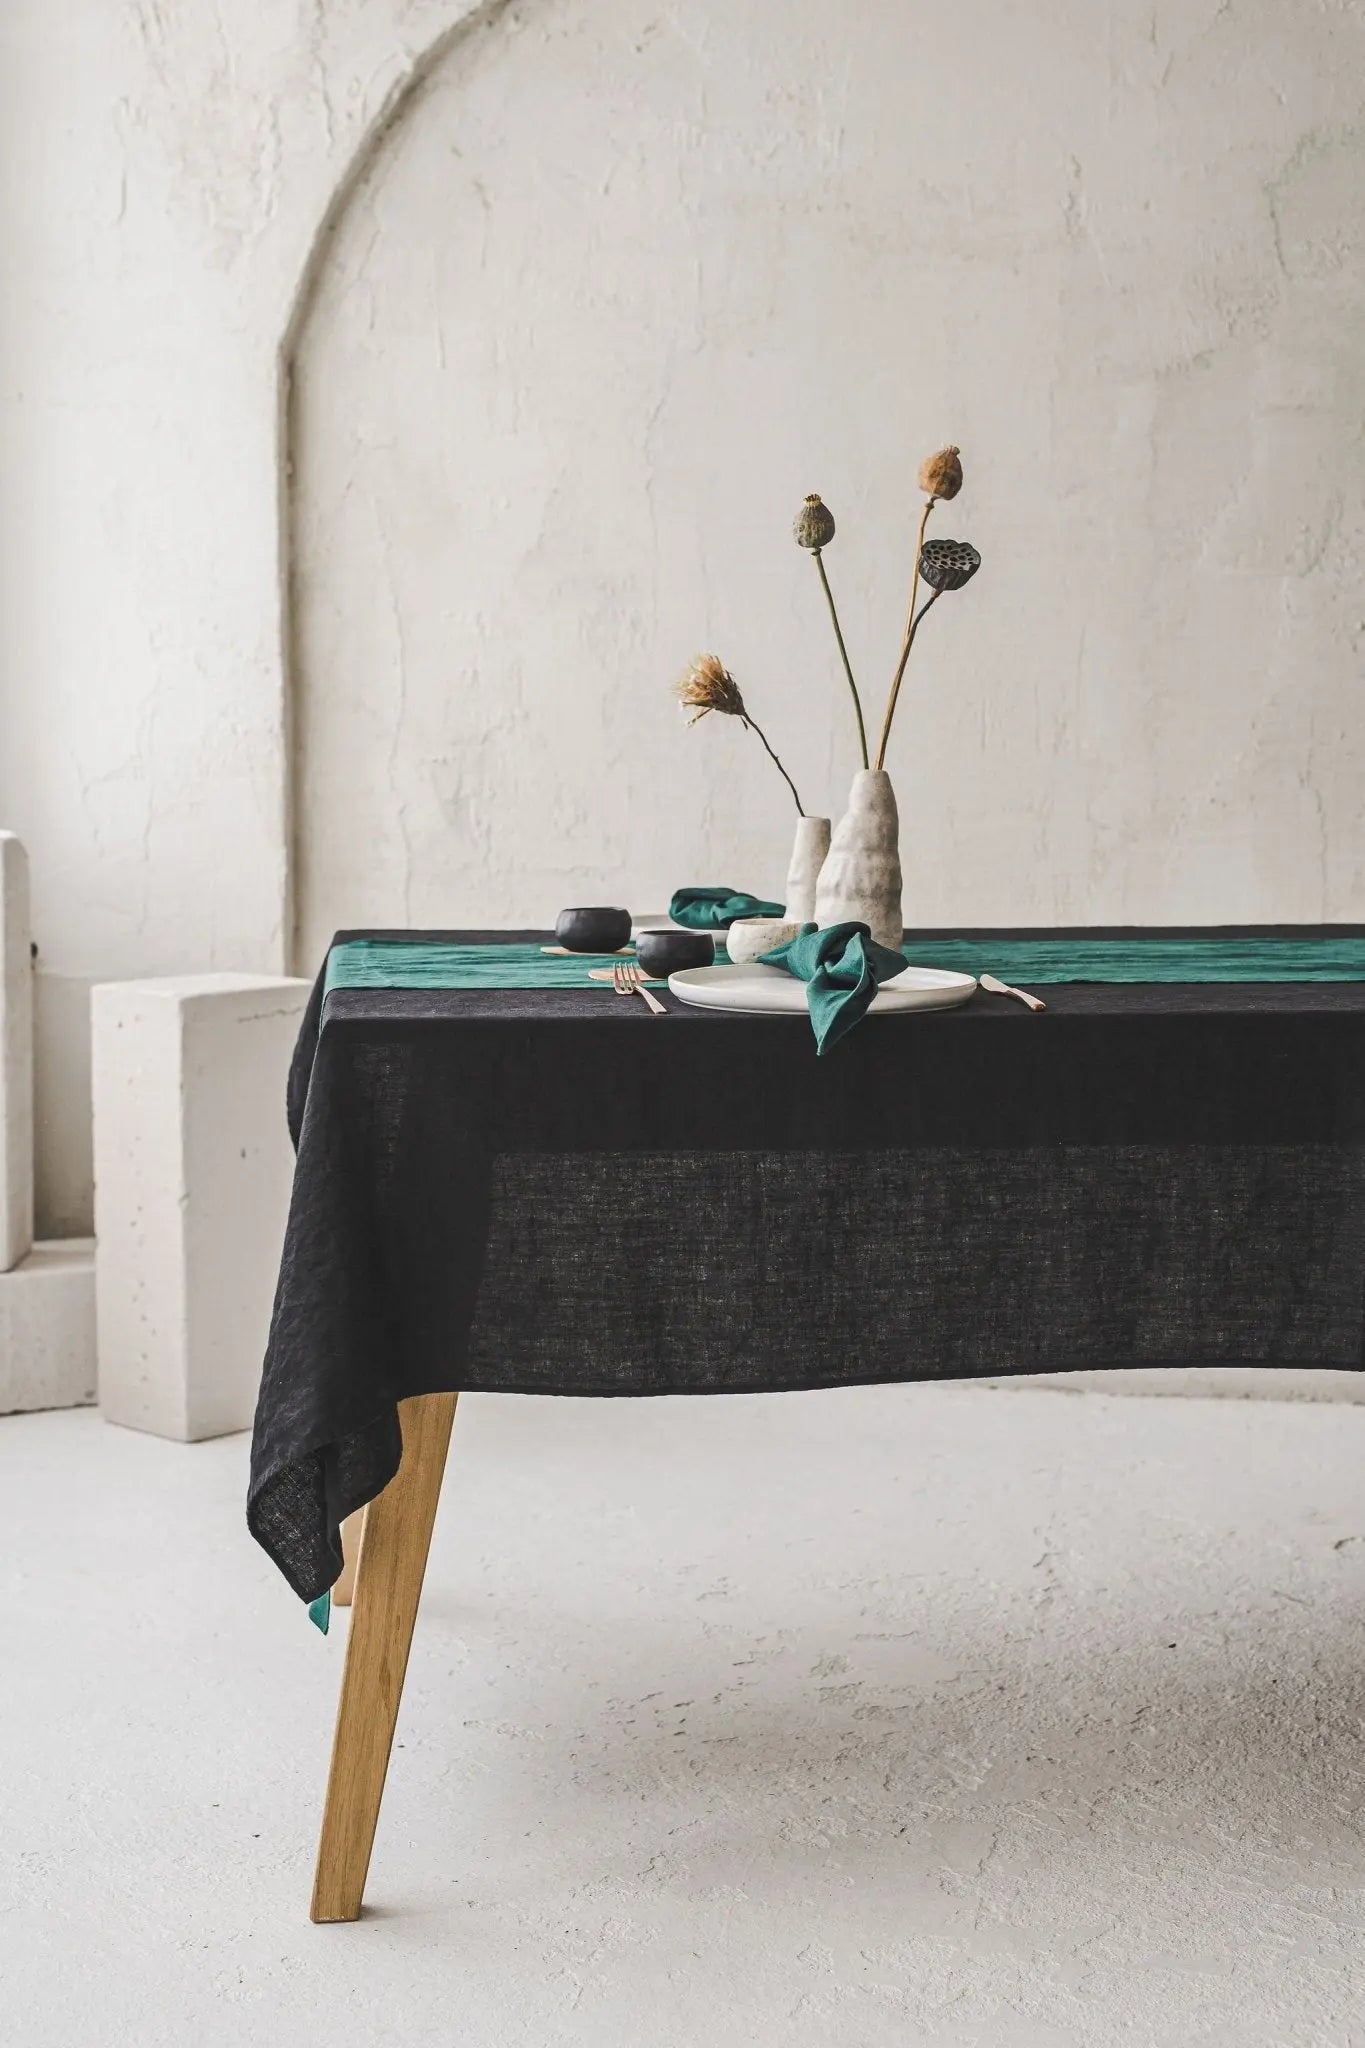 Natural Stonewashed Linen Tablecloth - Epic Linen luxury linen